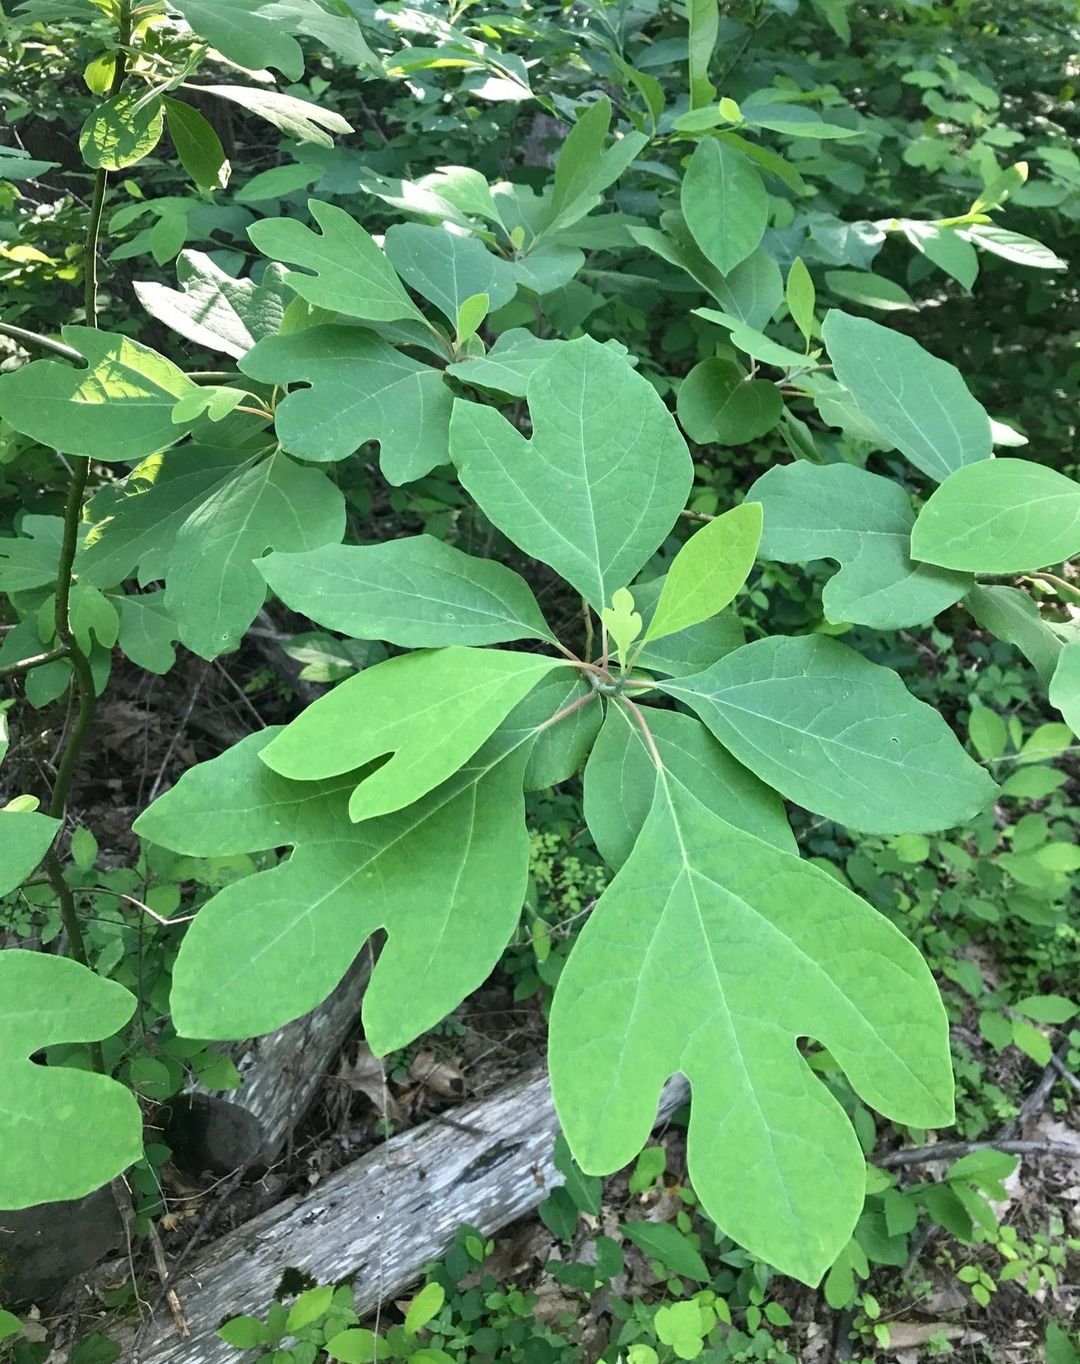  A lush Sassafras plant with abundant green leaves thrives in the serene woodland environment.